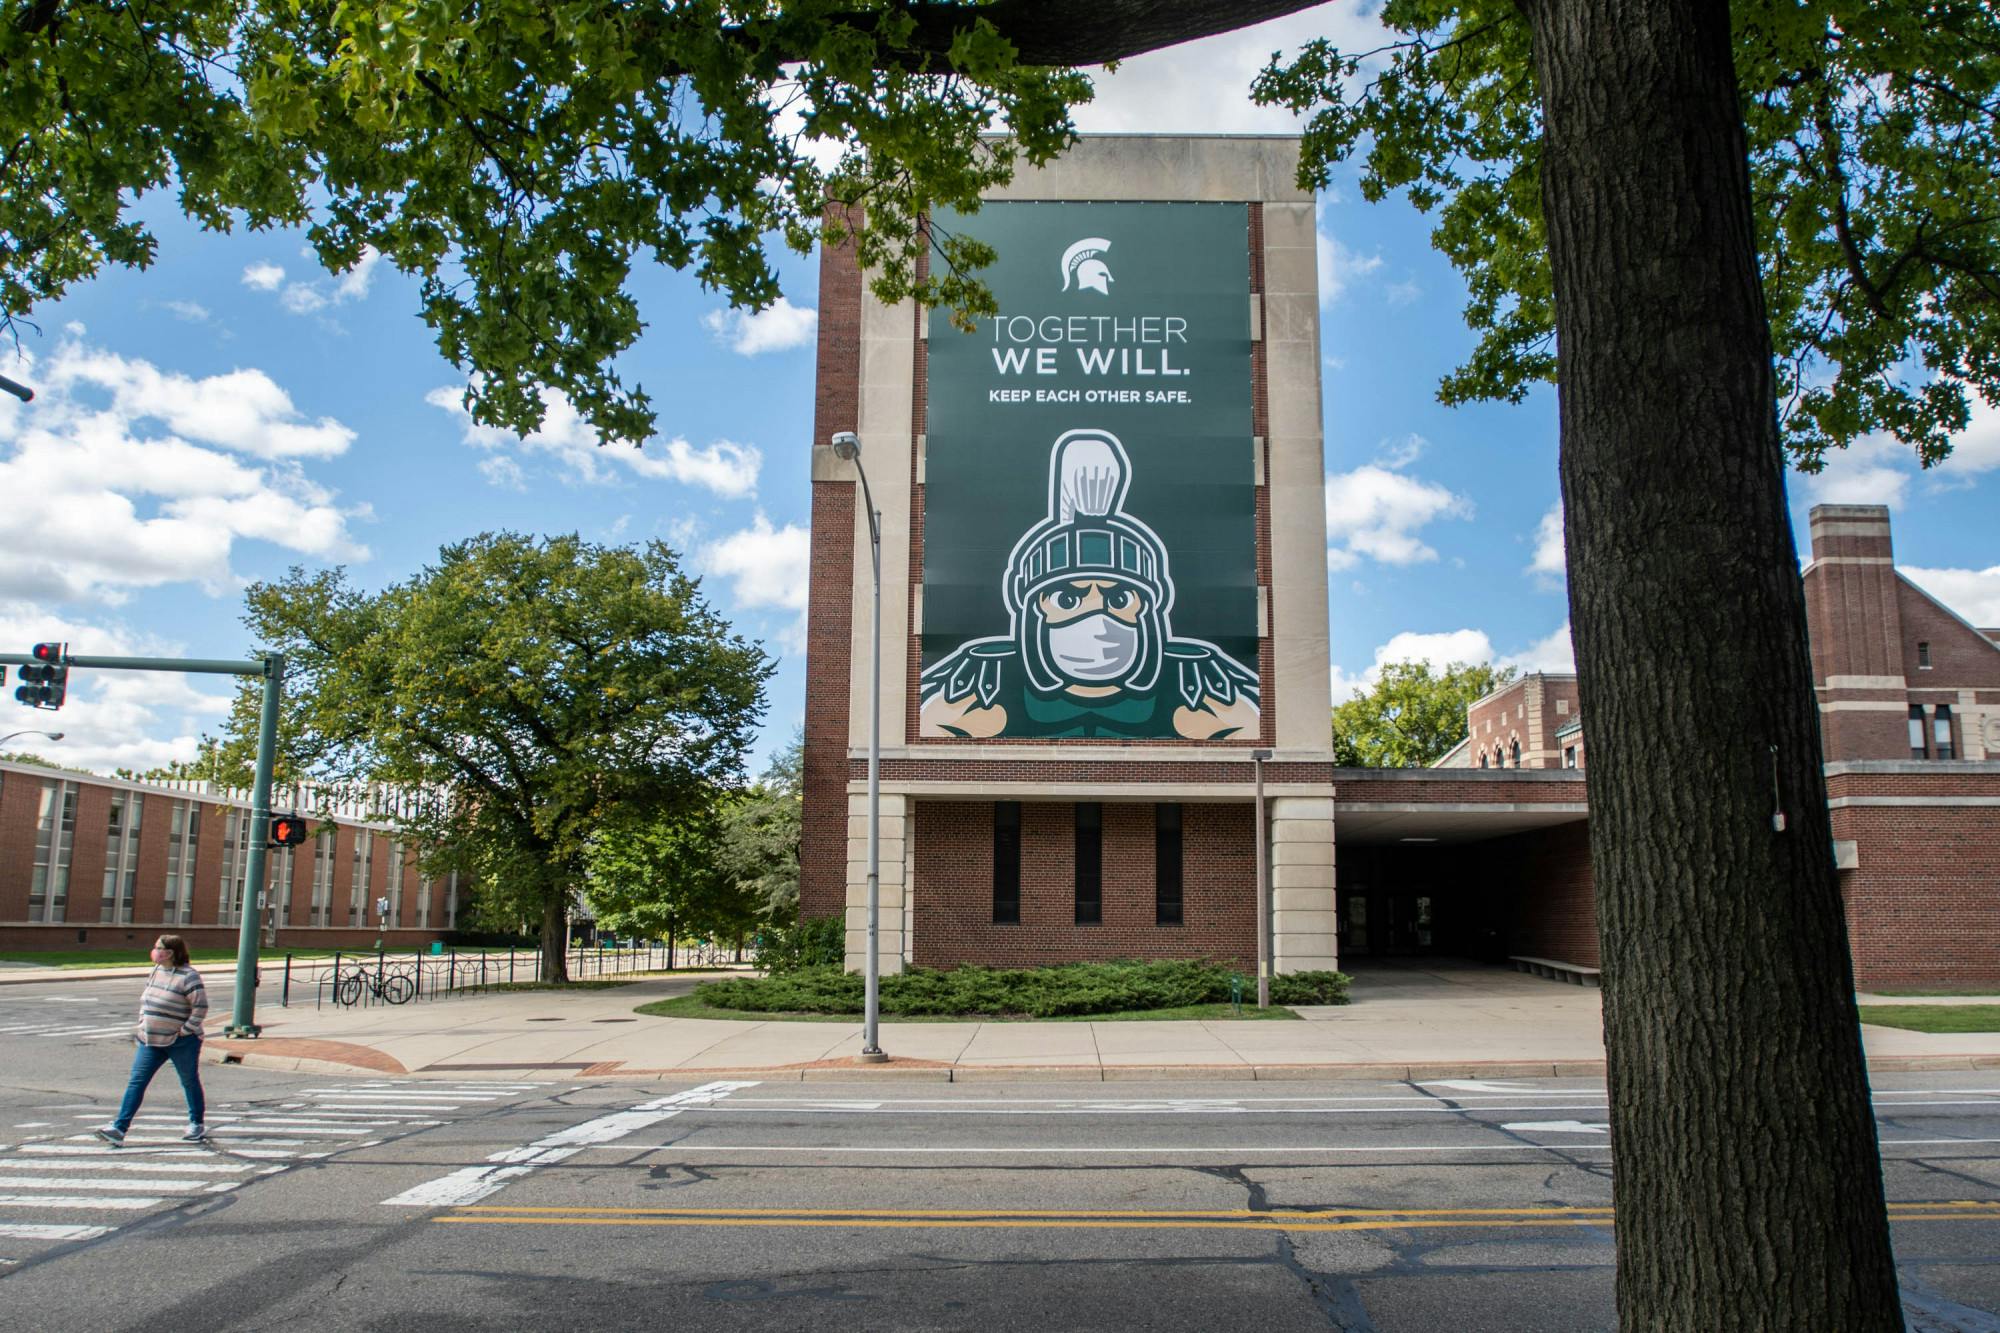 Campus on Sept. 18, 2020. MSU has put up large posters around campus to encourage students and the community to practice social distancing and wear masks.